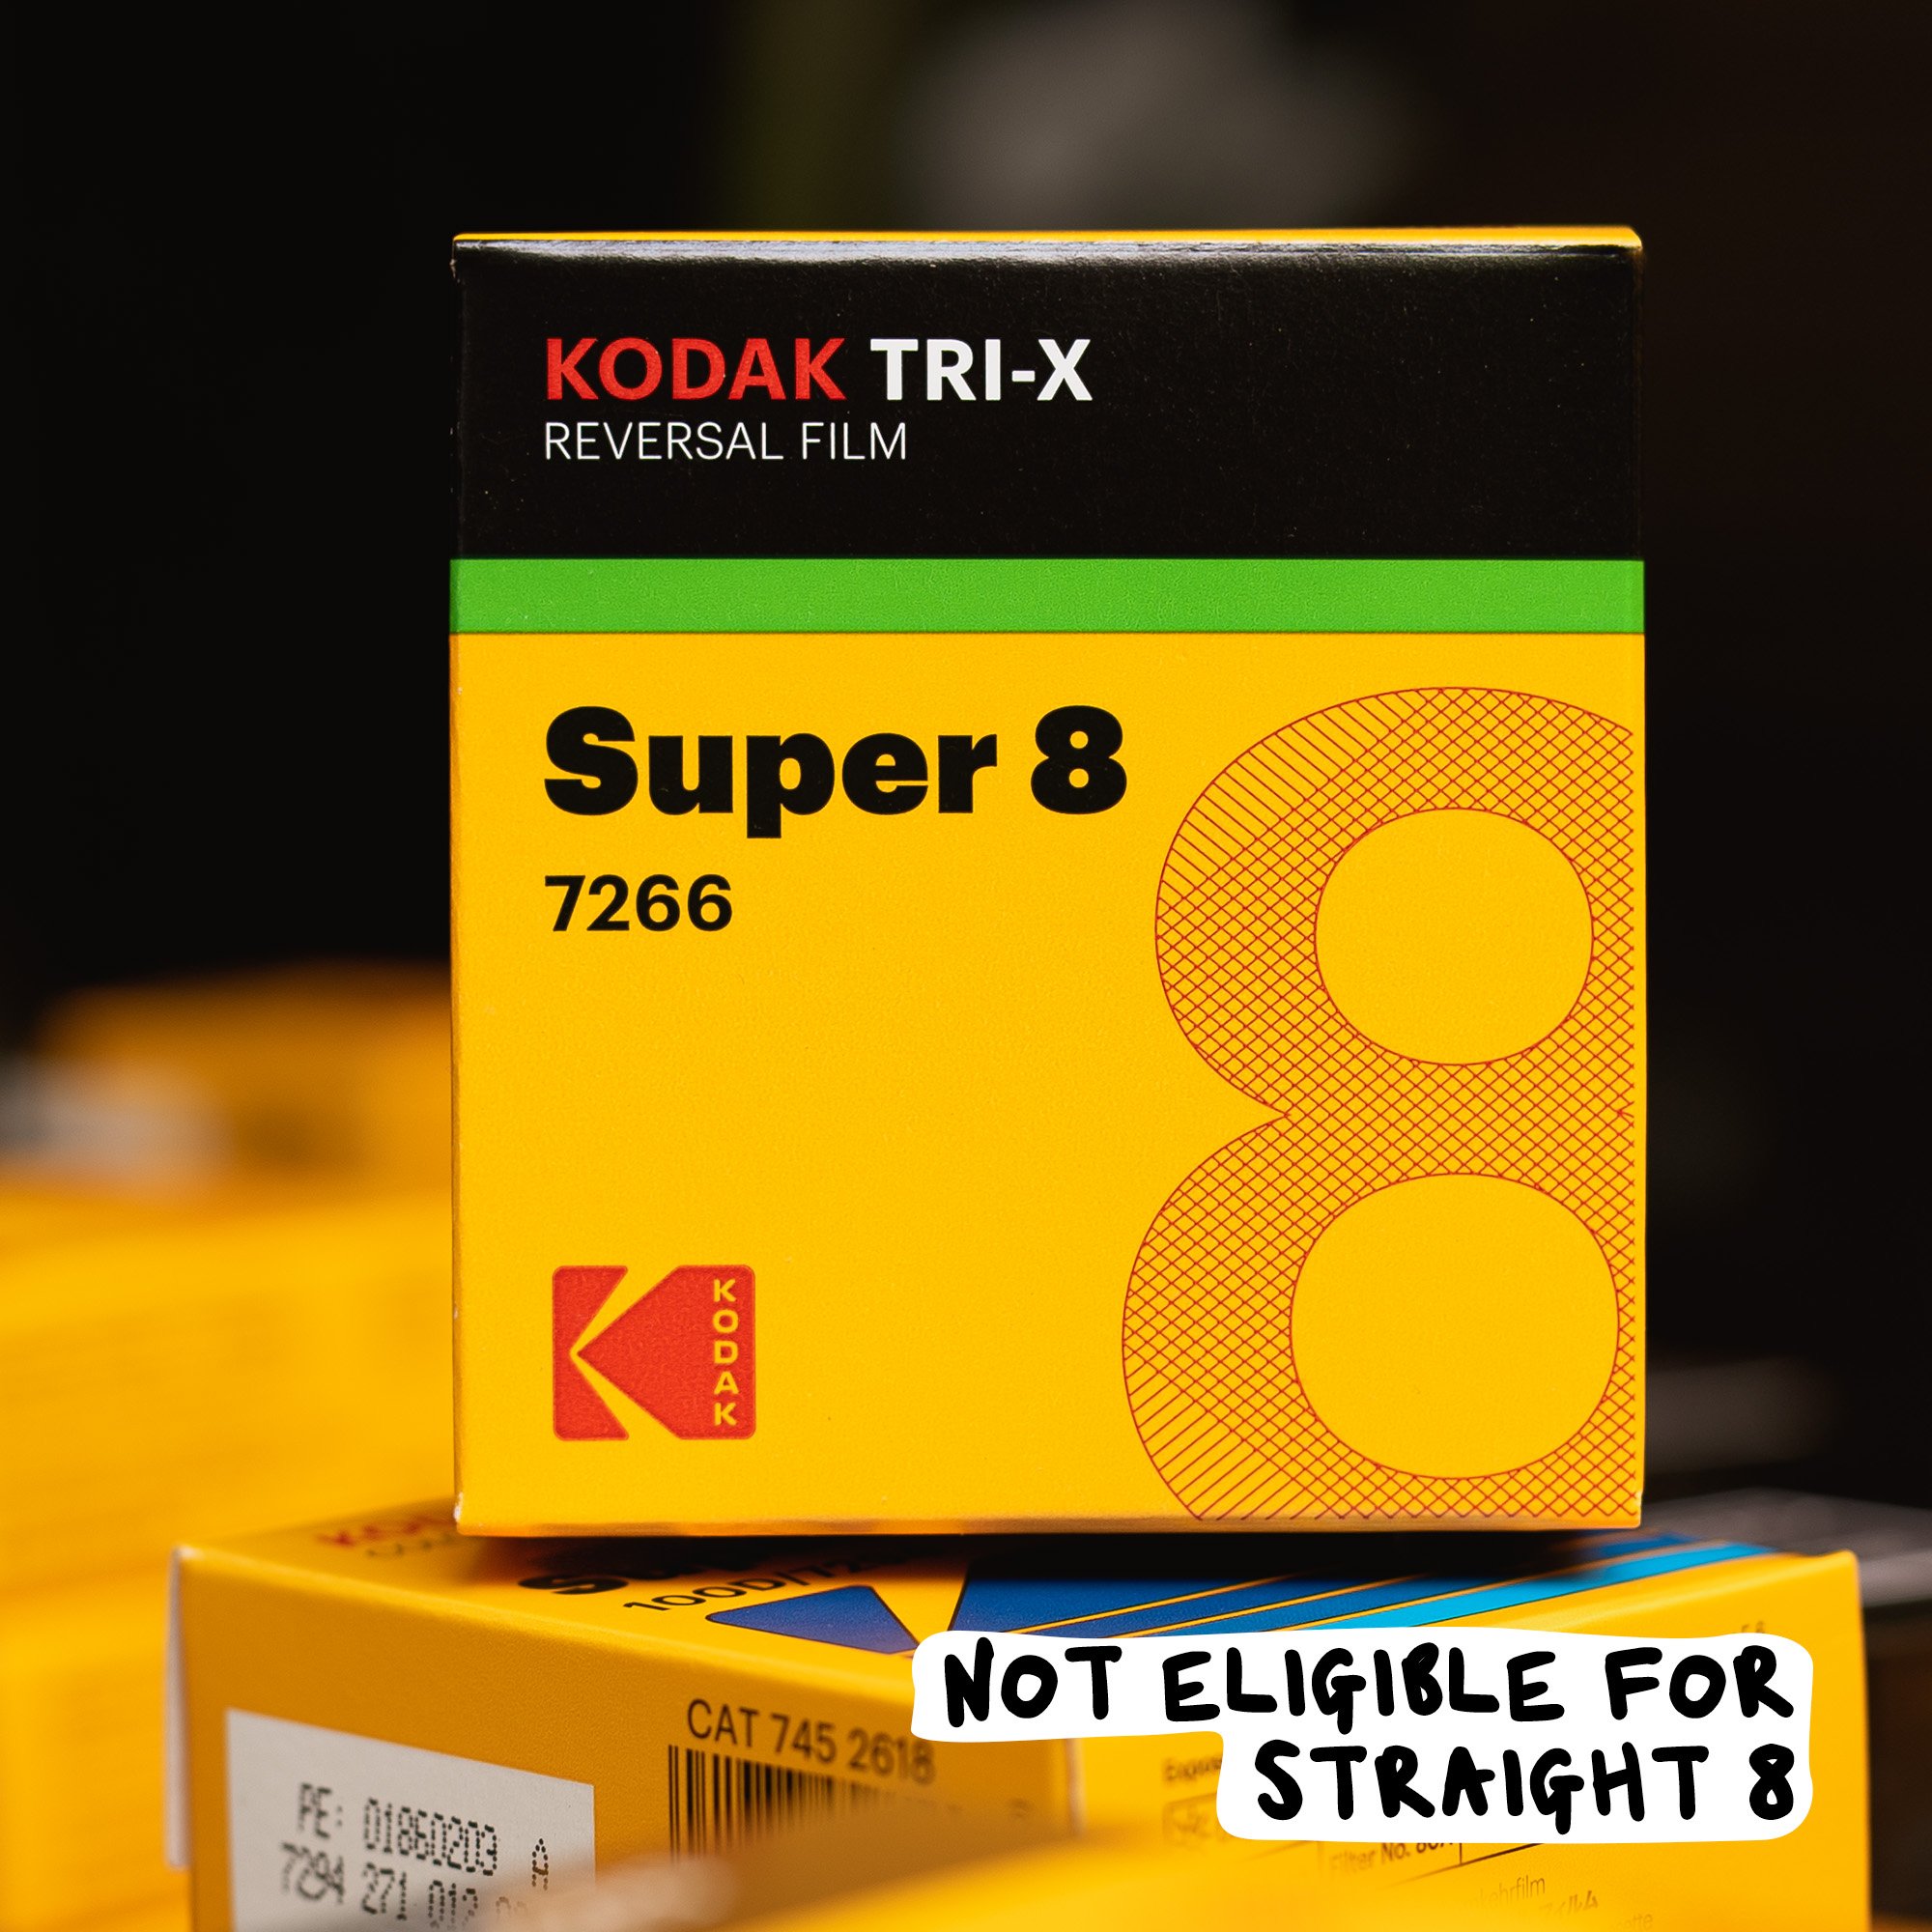 tri-x super 8 film - NOT ELIGIBLE FOR STRAIGHT 8 — straight 8